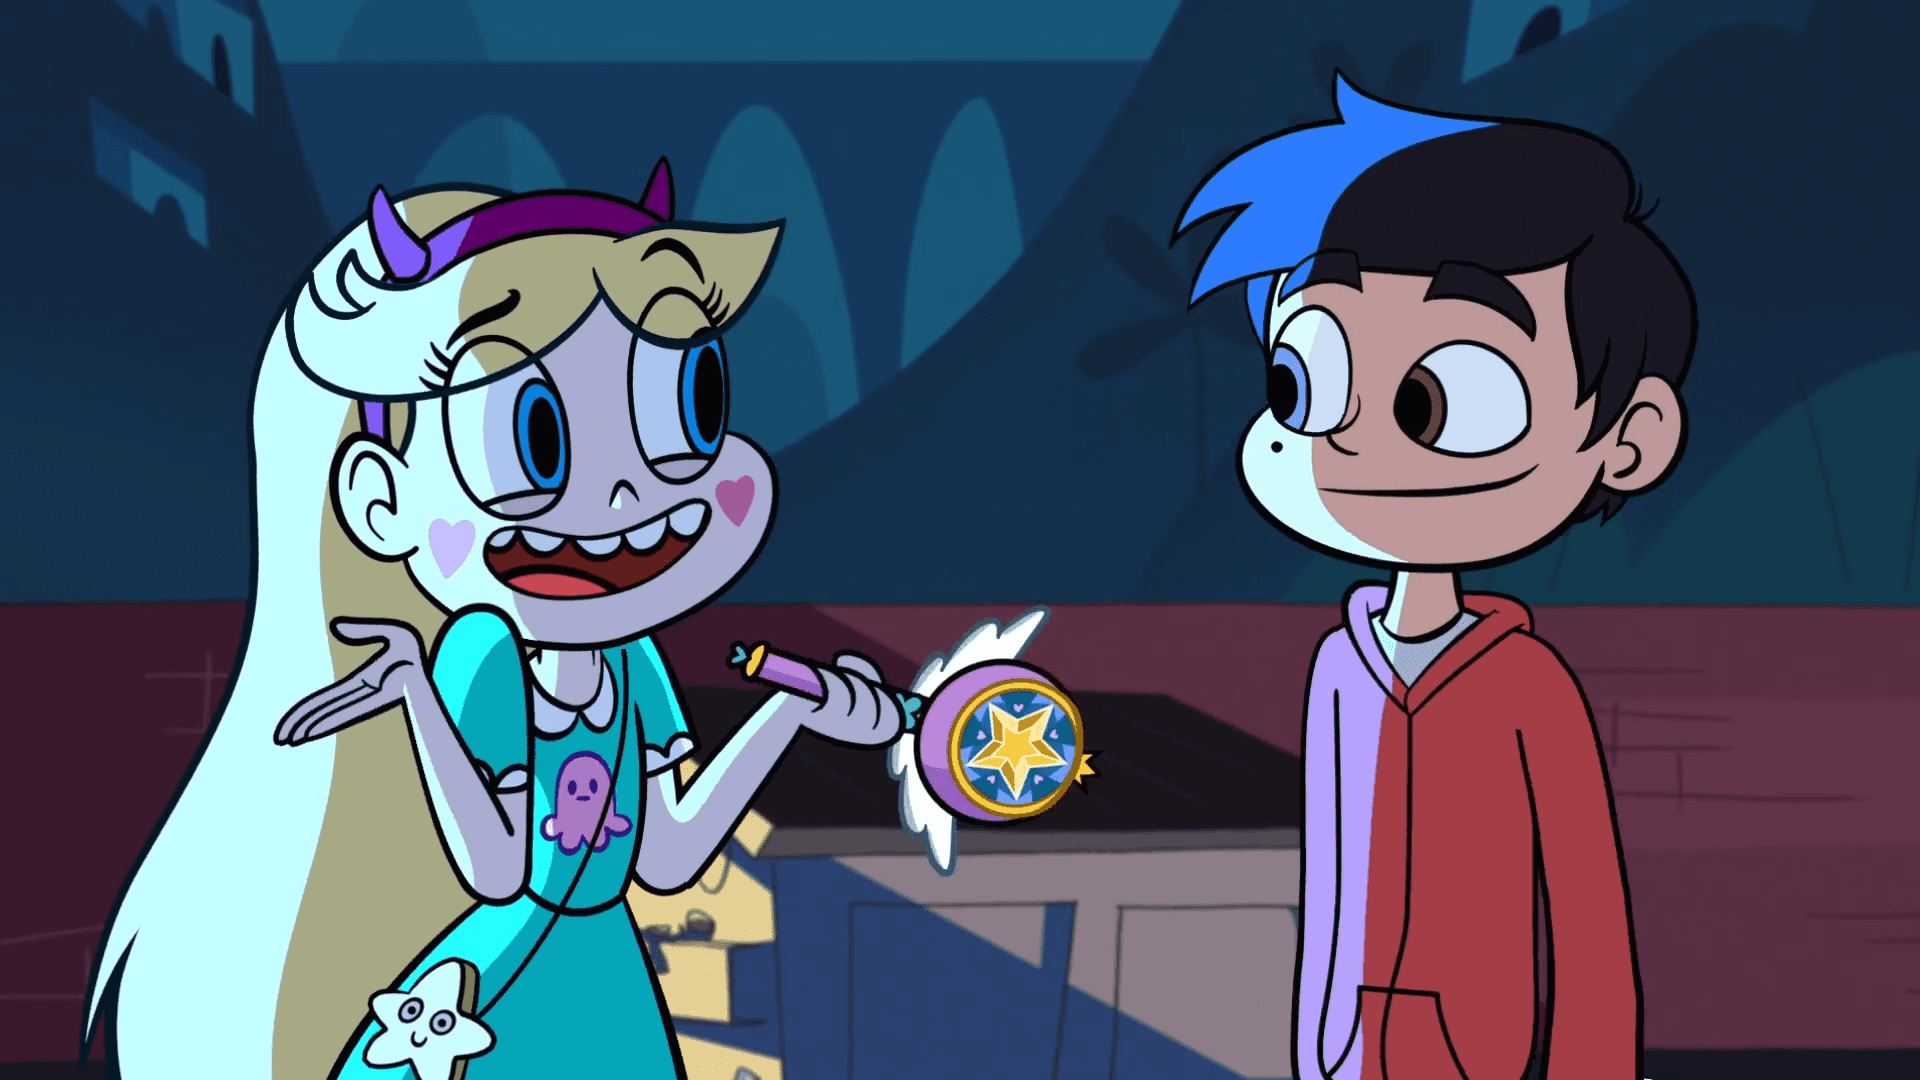 Star Butterfly And Marco Diaz Exploring A Magical Realm